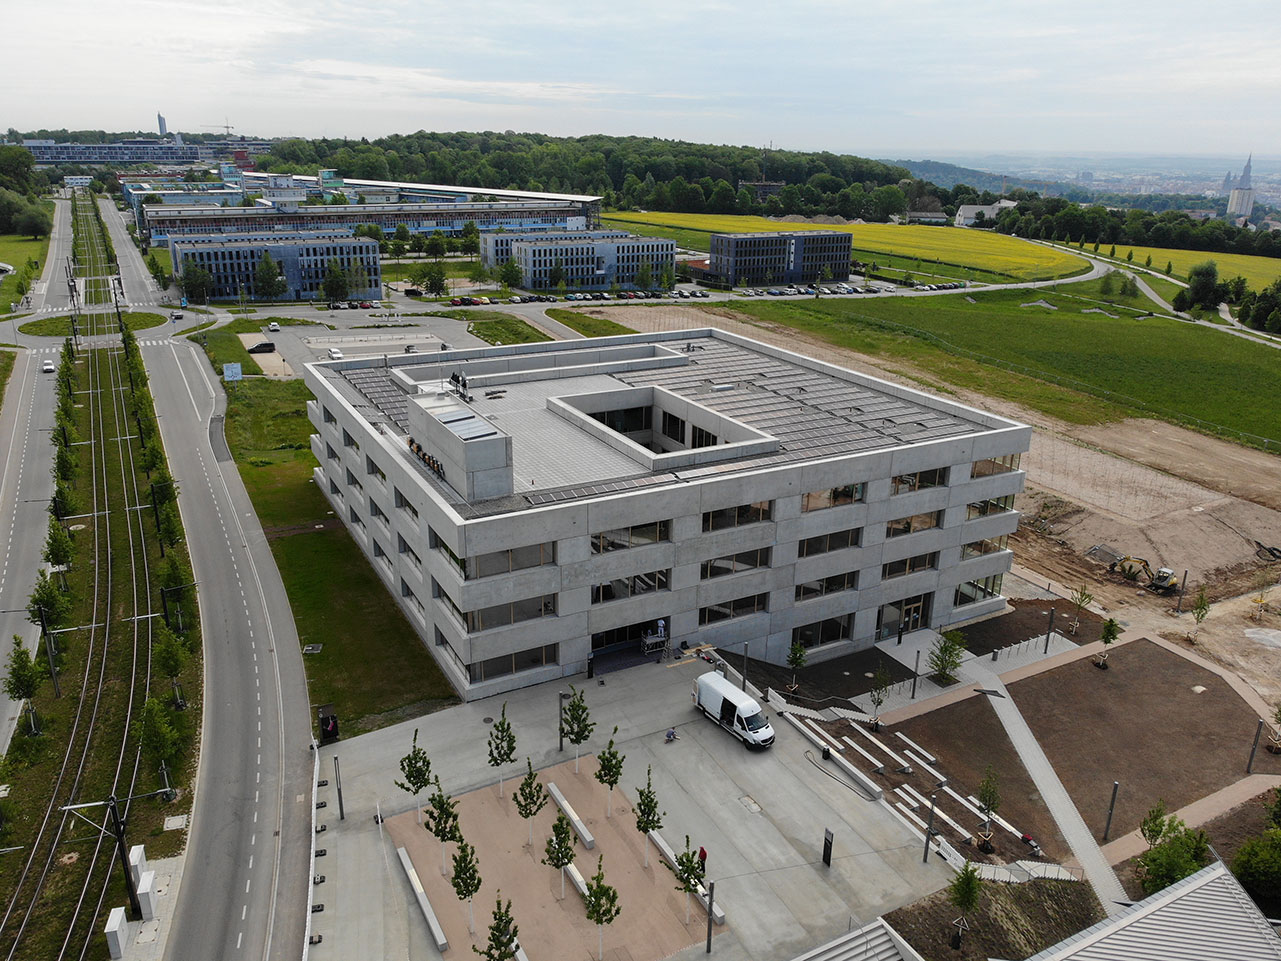 New replacement building at Ulm University of Applied Sciences